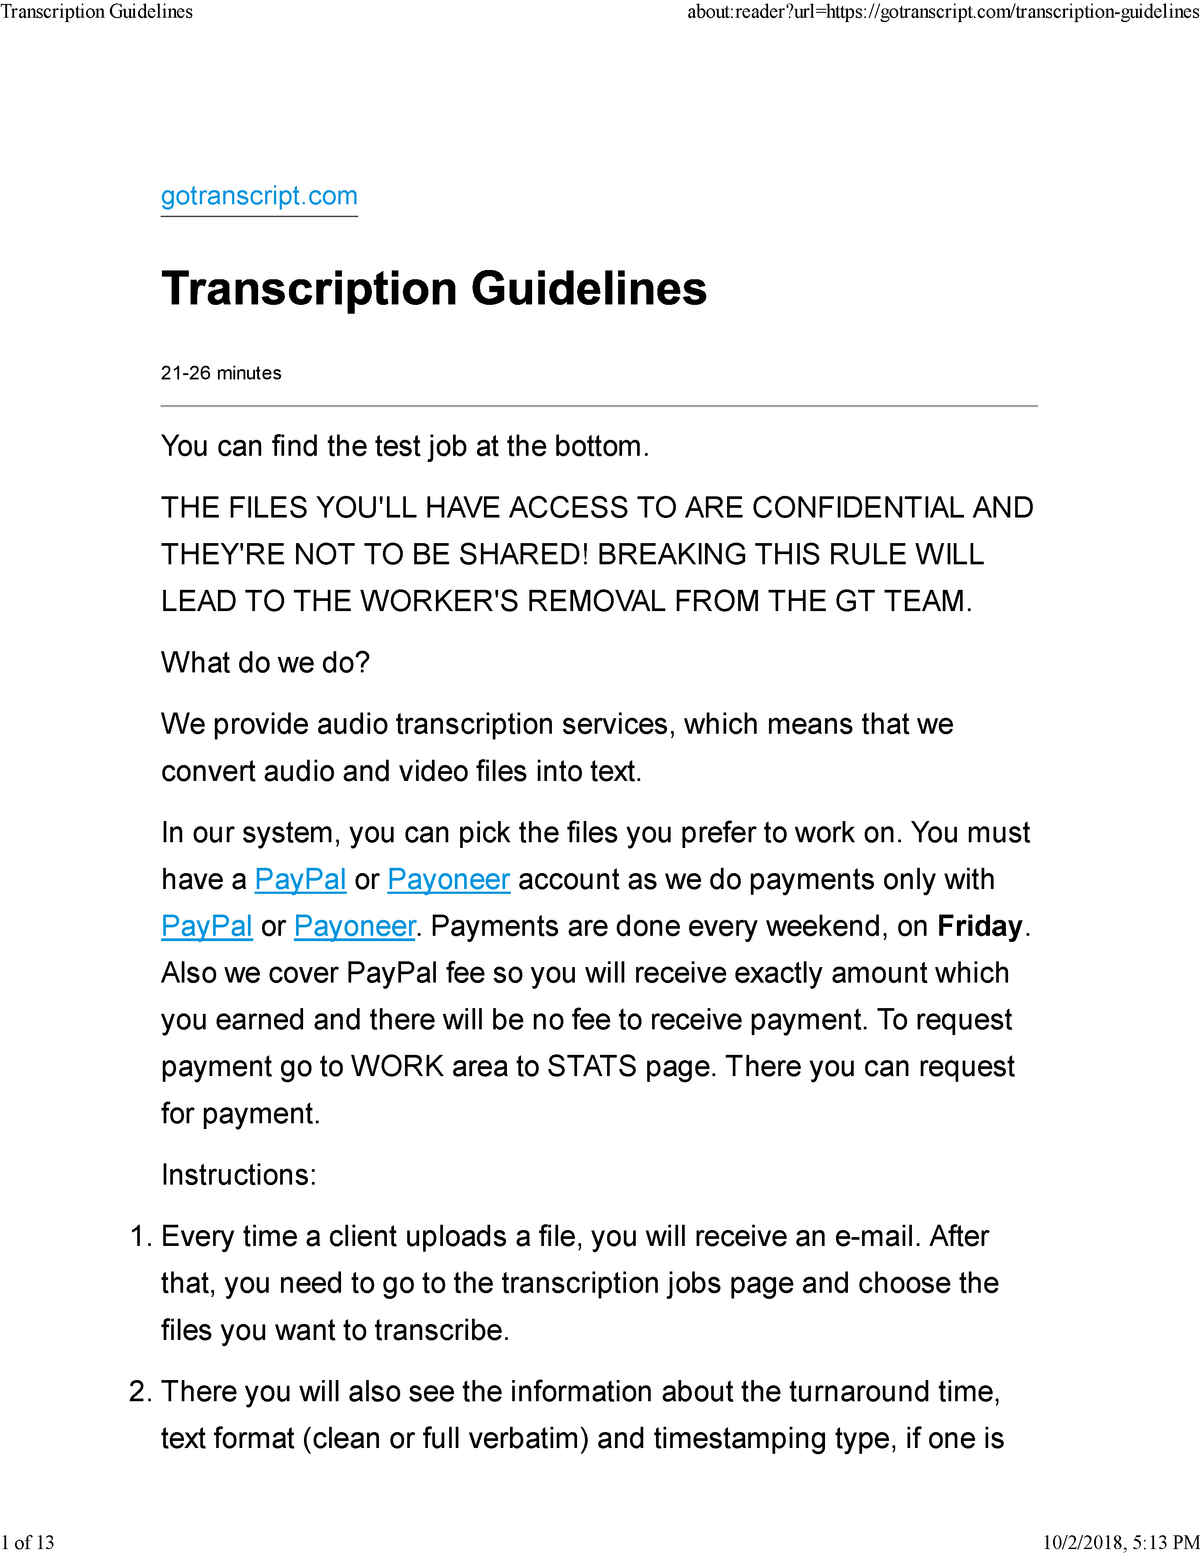 transcription-guidelines-gotranscript-21-26-minutes-you-can-find-the